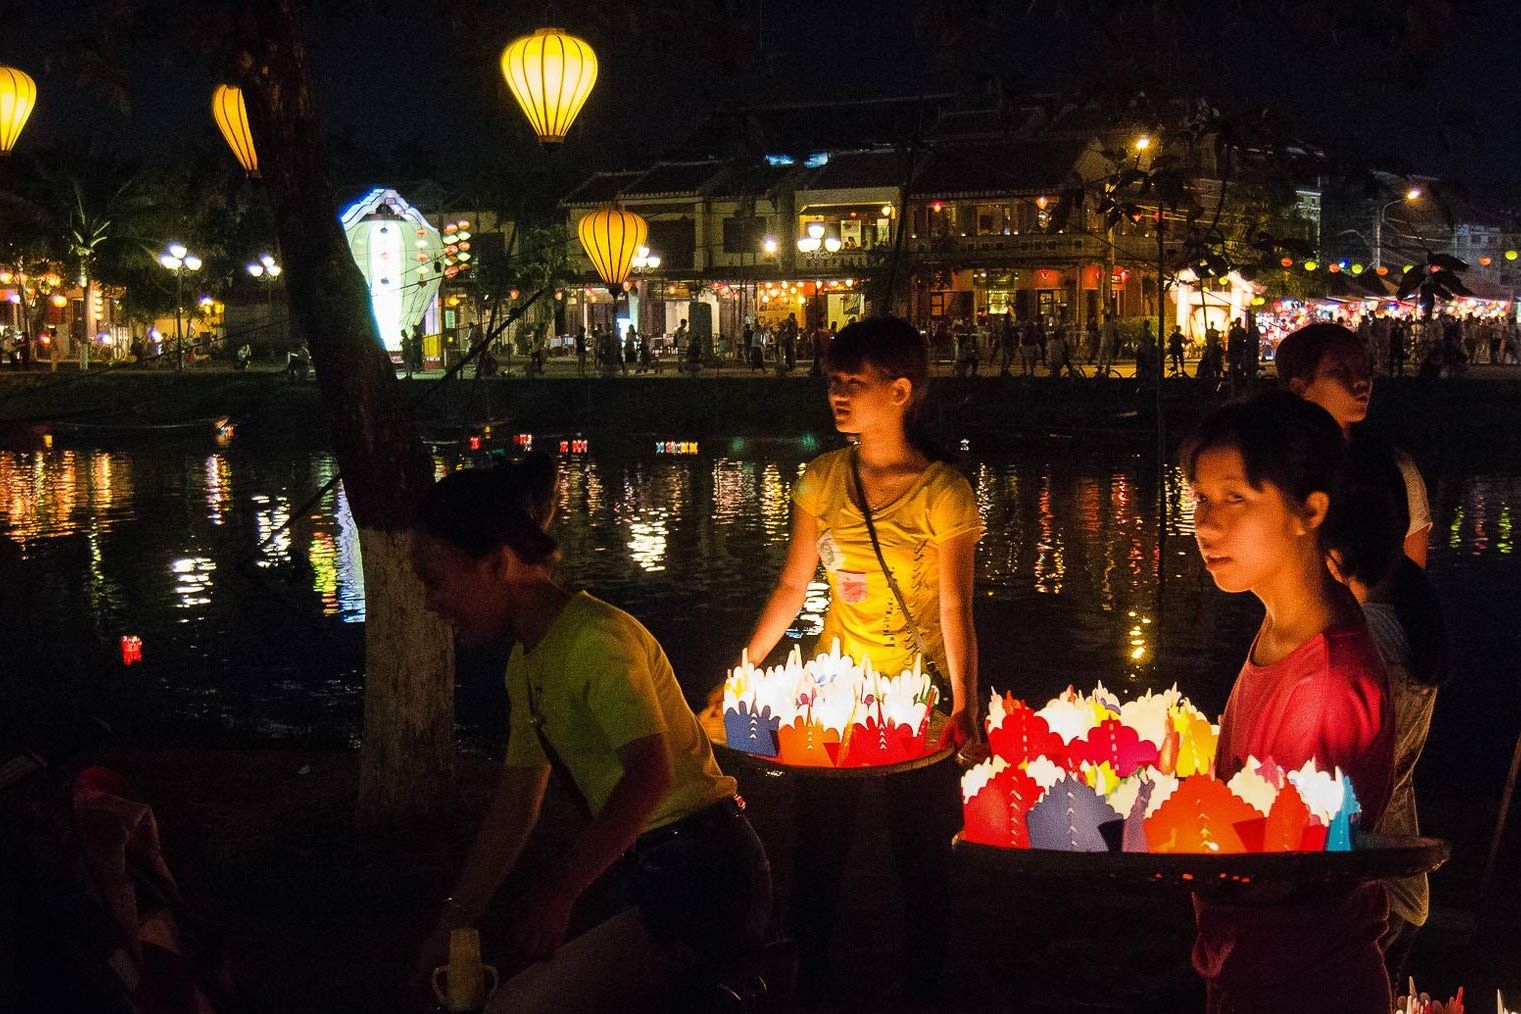 Girls selling papper lanterns in Hoi An